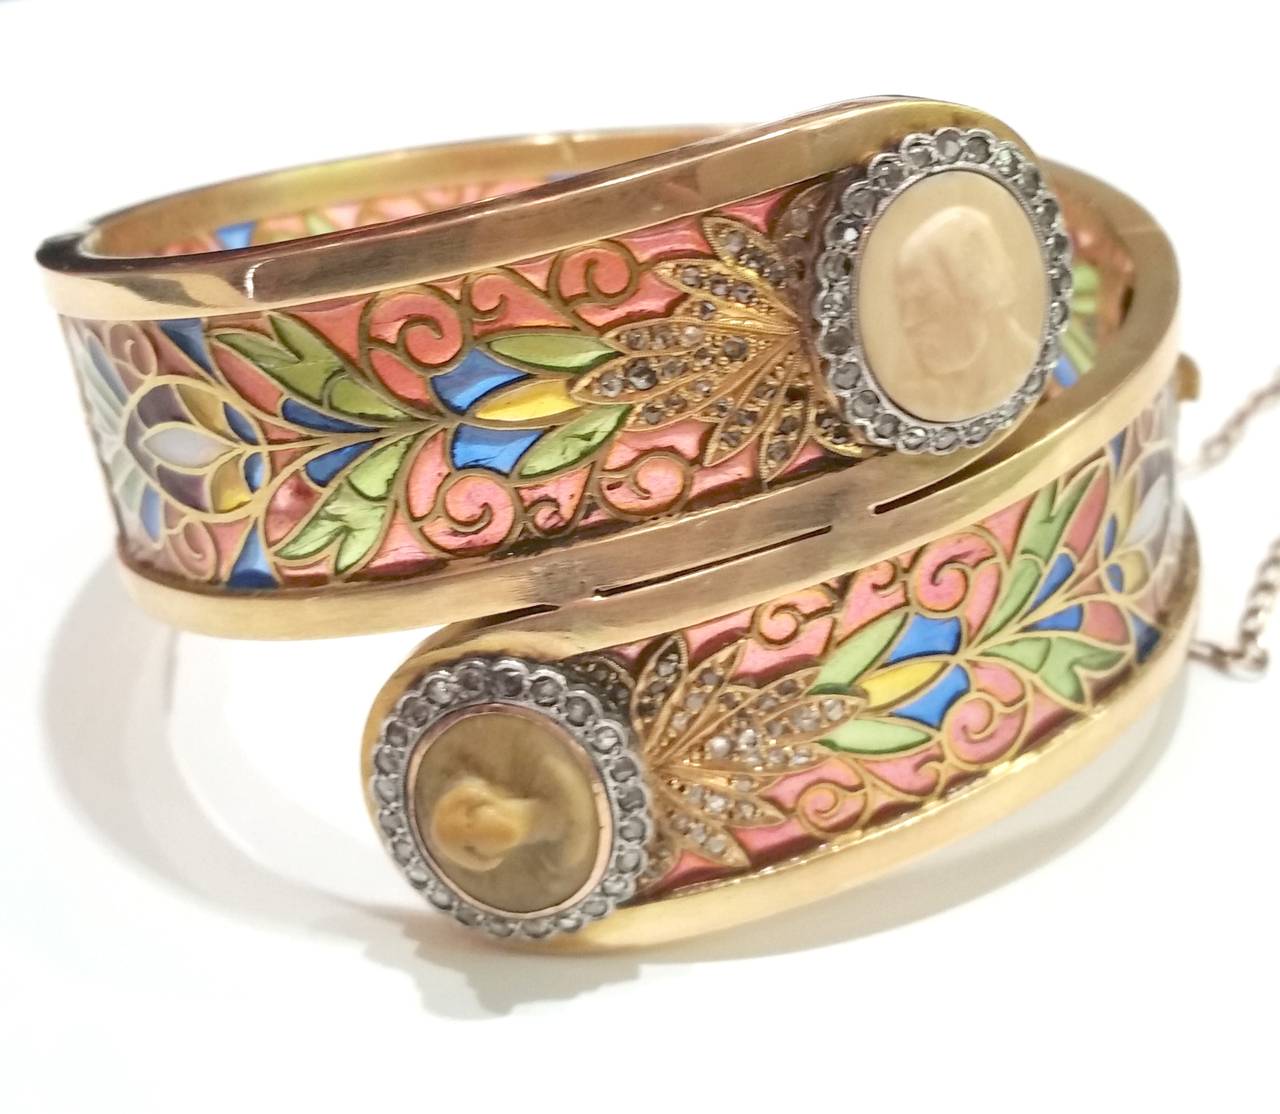 Art Nouveau bangle bracelet, made of yellow gold and platinum, with plique-a-jour multicoloured enamel depicting vegetal motifs.
On the ends, two diamond cluster with cameos.
Signed Masriera y Carreras

Rose cut diamonds, total weight 0.50ct